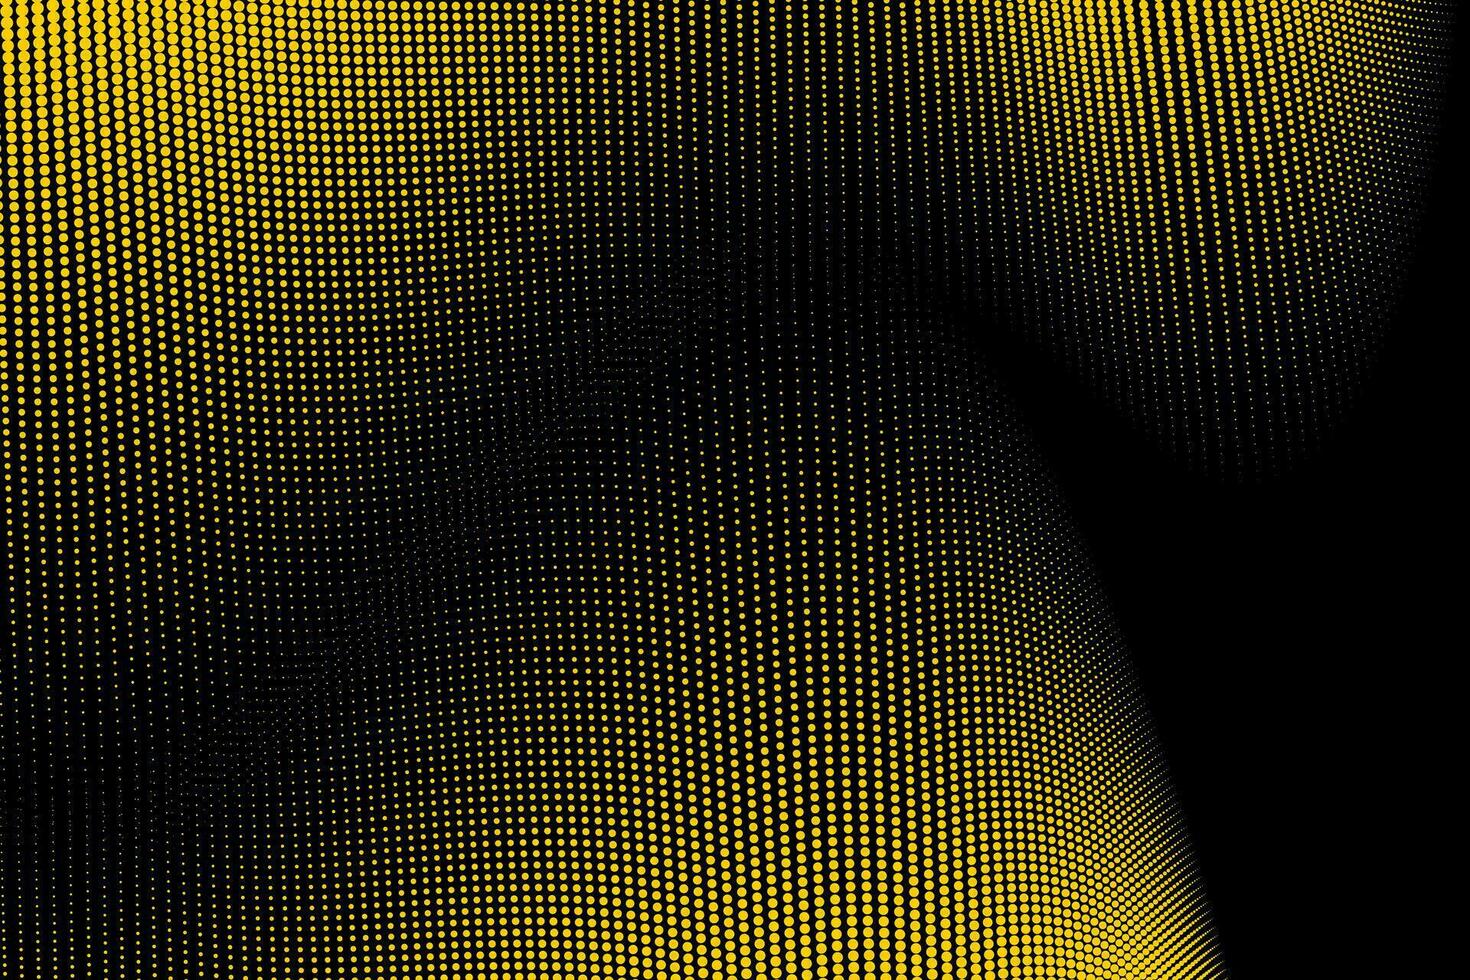 Grunge halftone texture, pop art design, black and yellow color, abstract background. Vector illustration